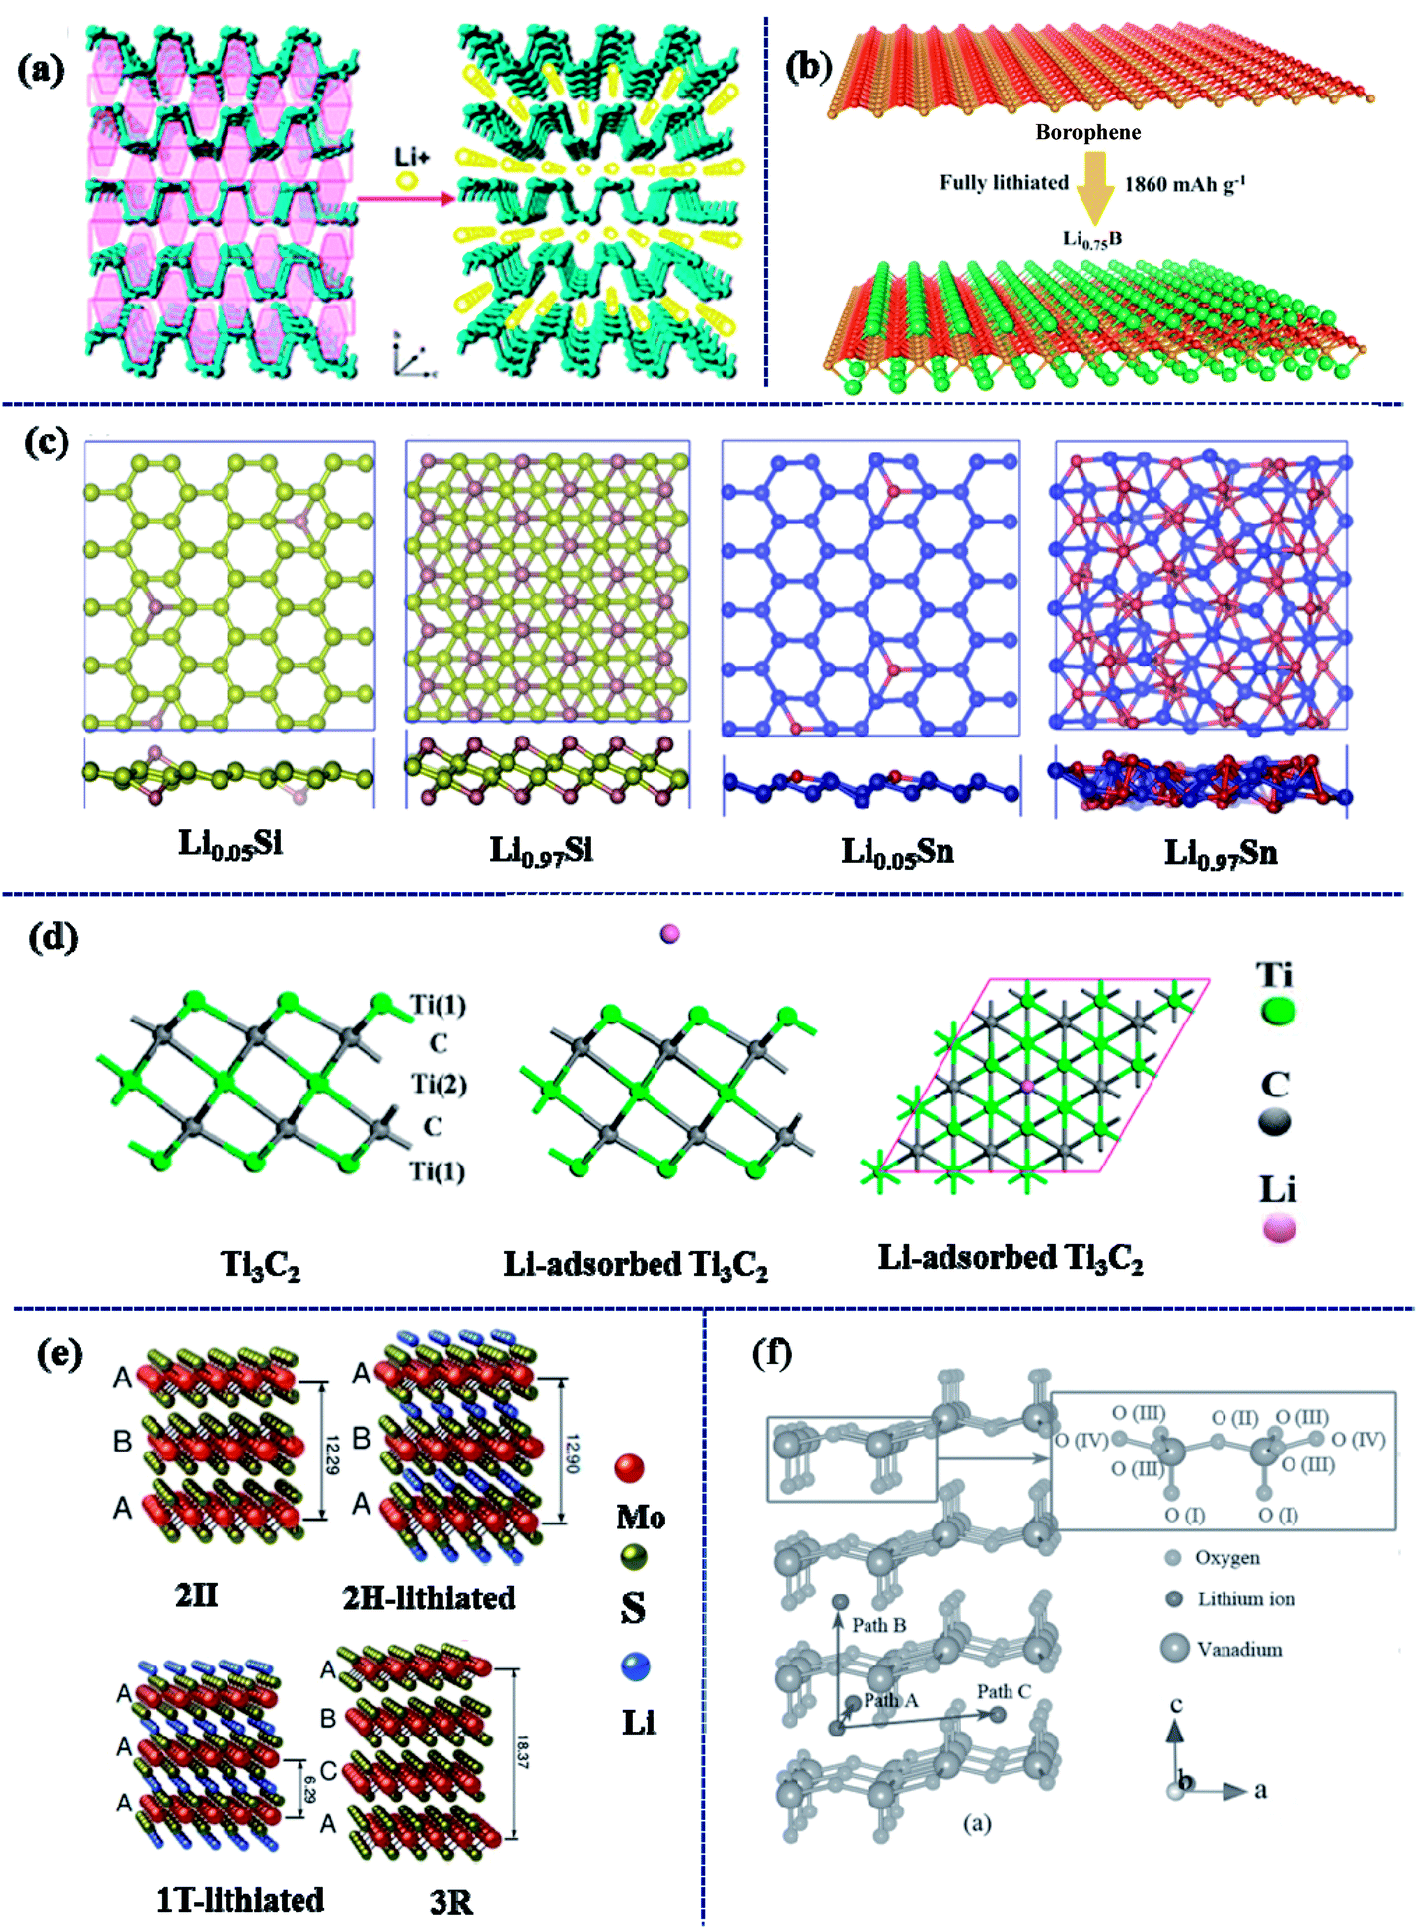 Emerging two-dimensional noncarbon nanomaterials for flexible 